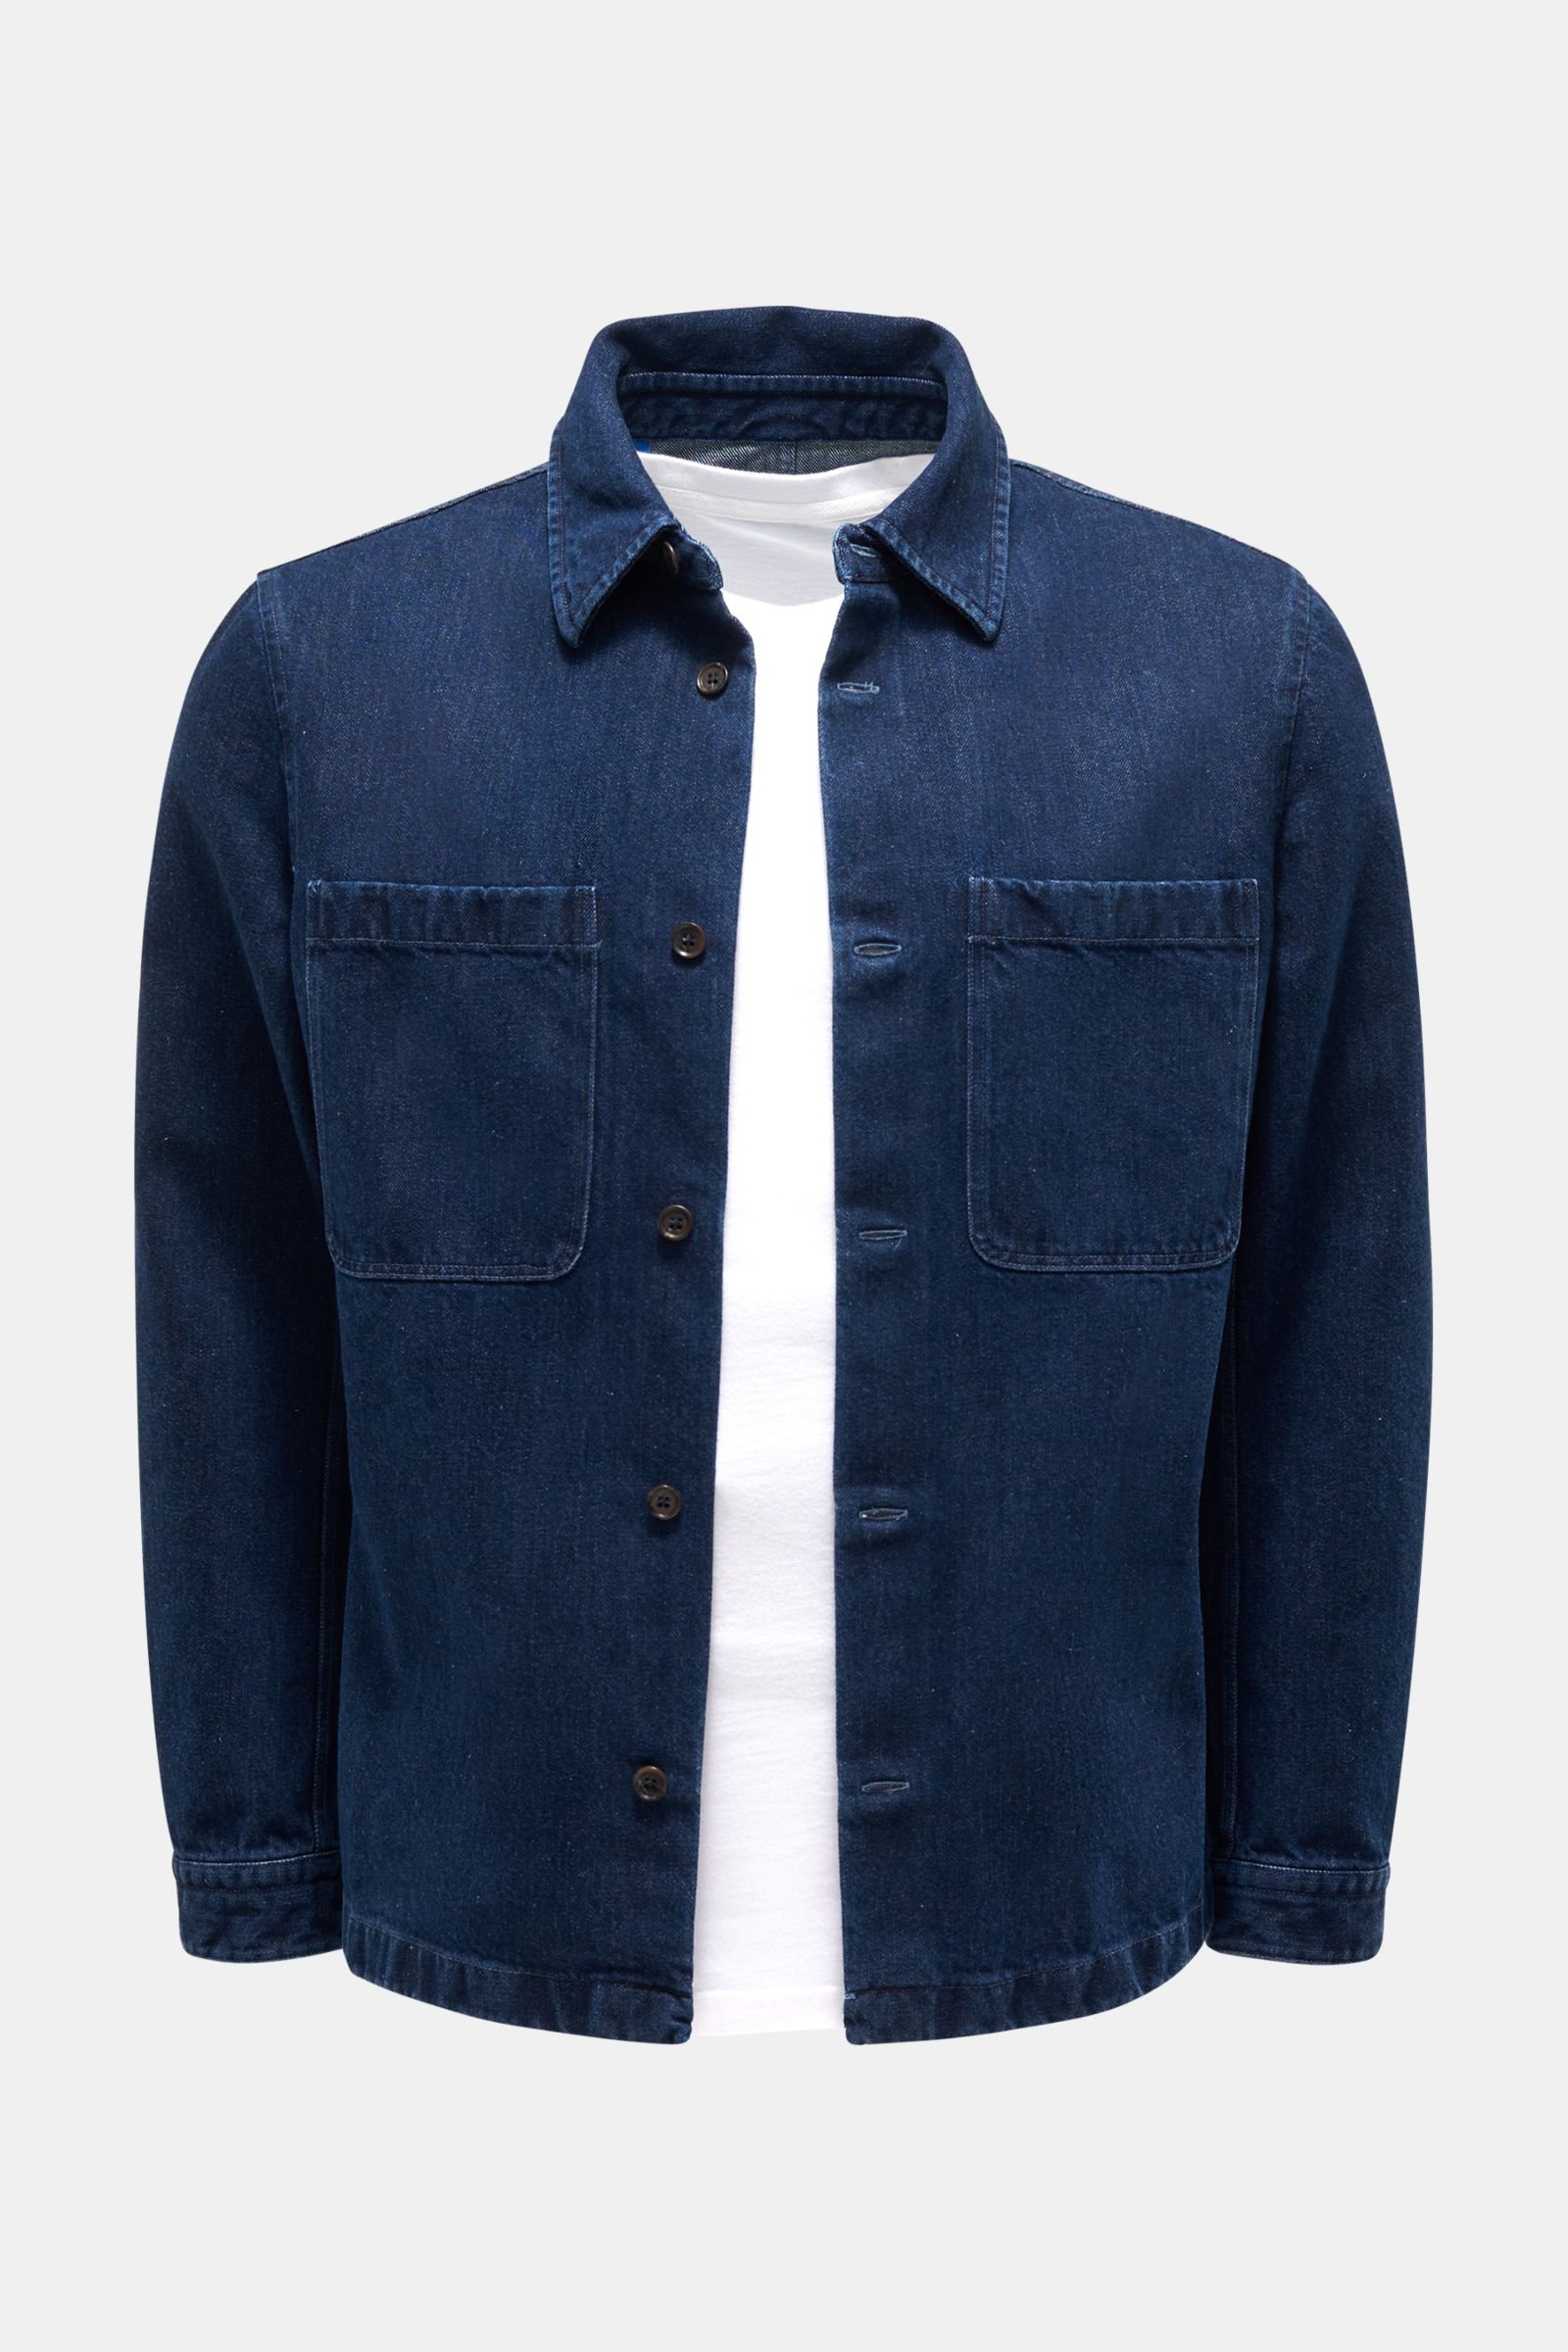 Jeans overshirt 'Worker' navy